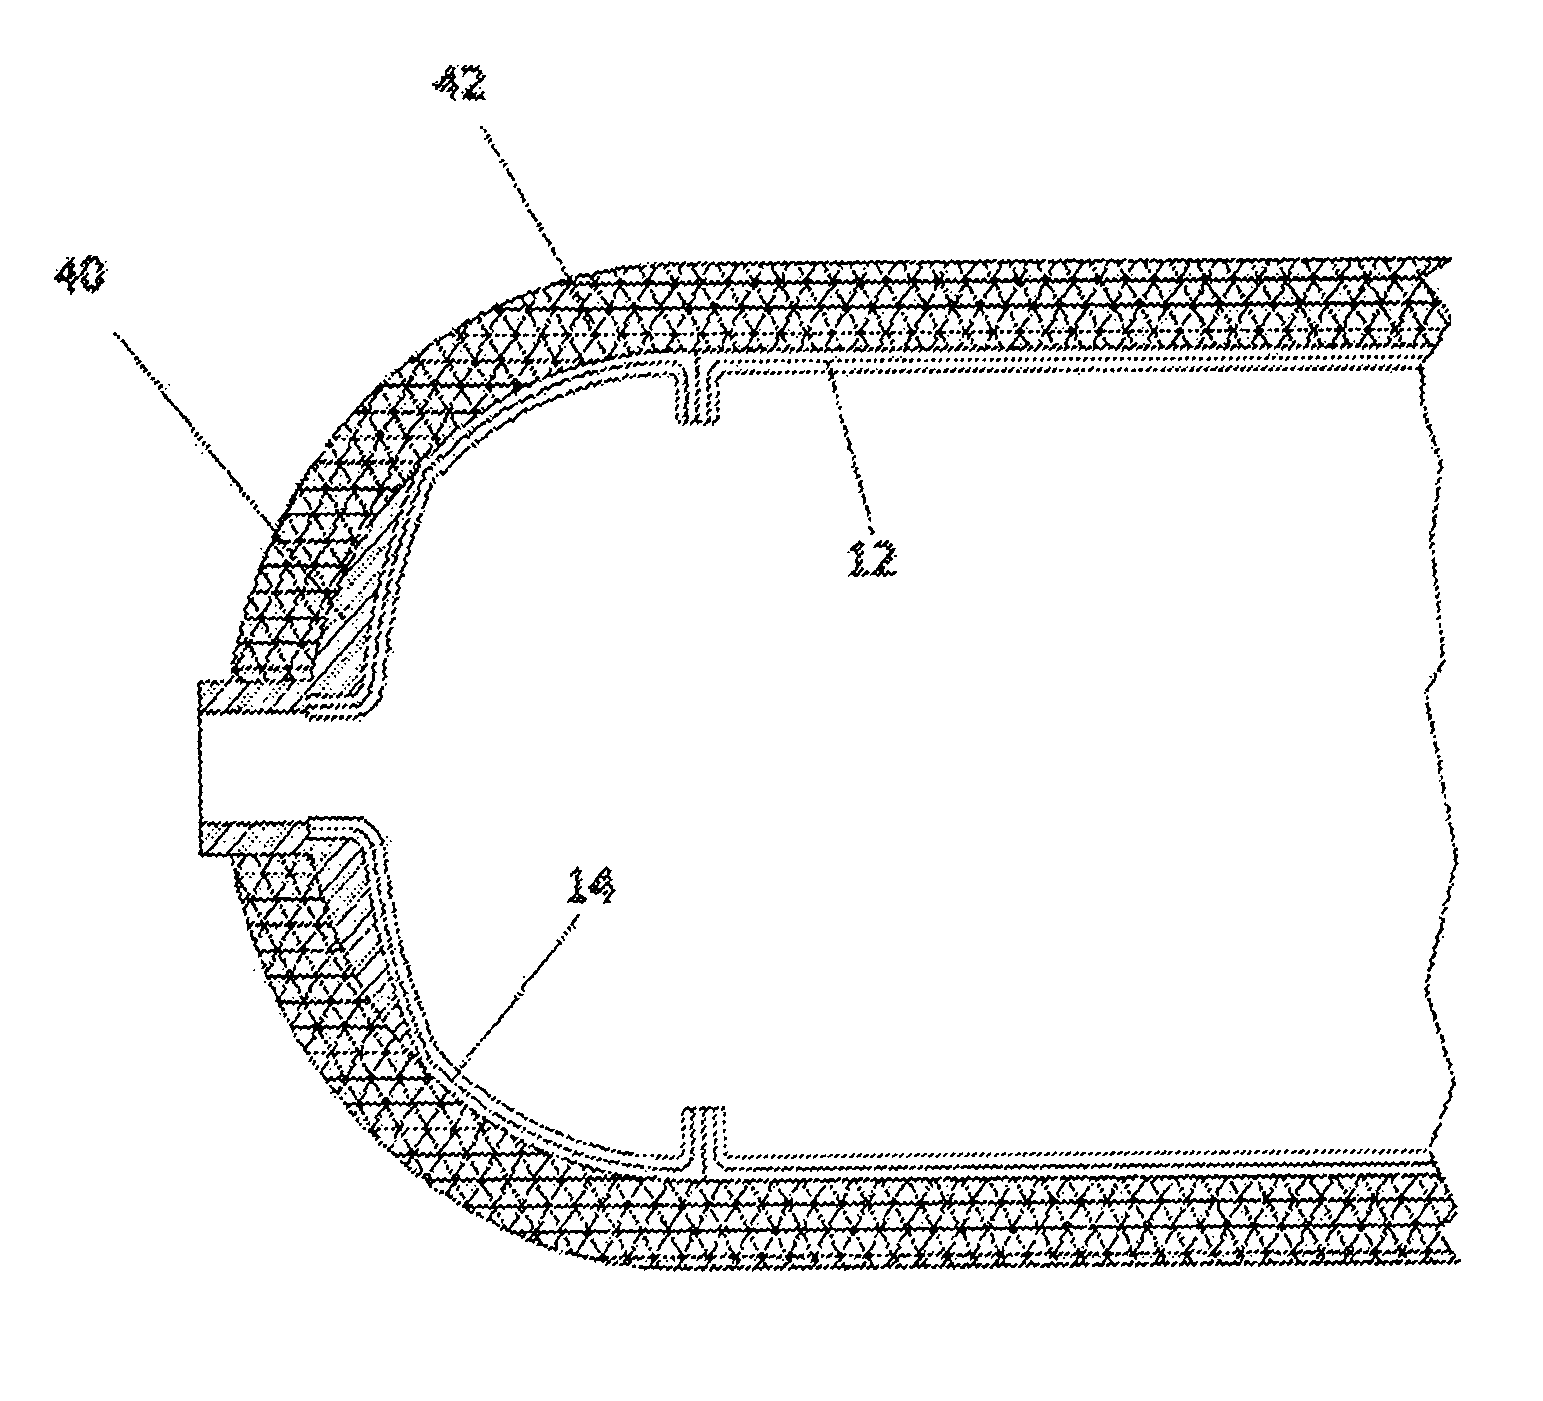 Method for manufacturing an inner liner for a storage tank